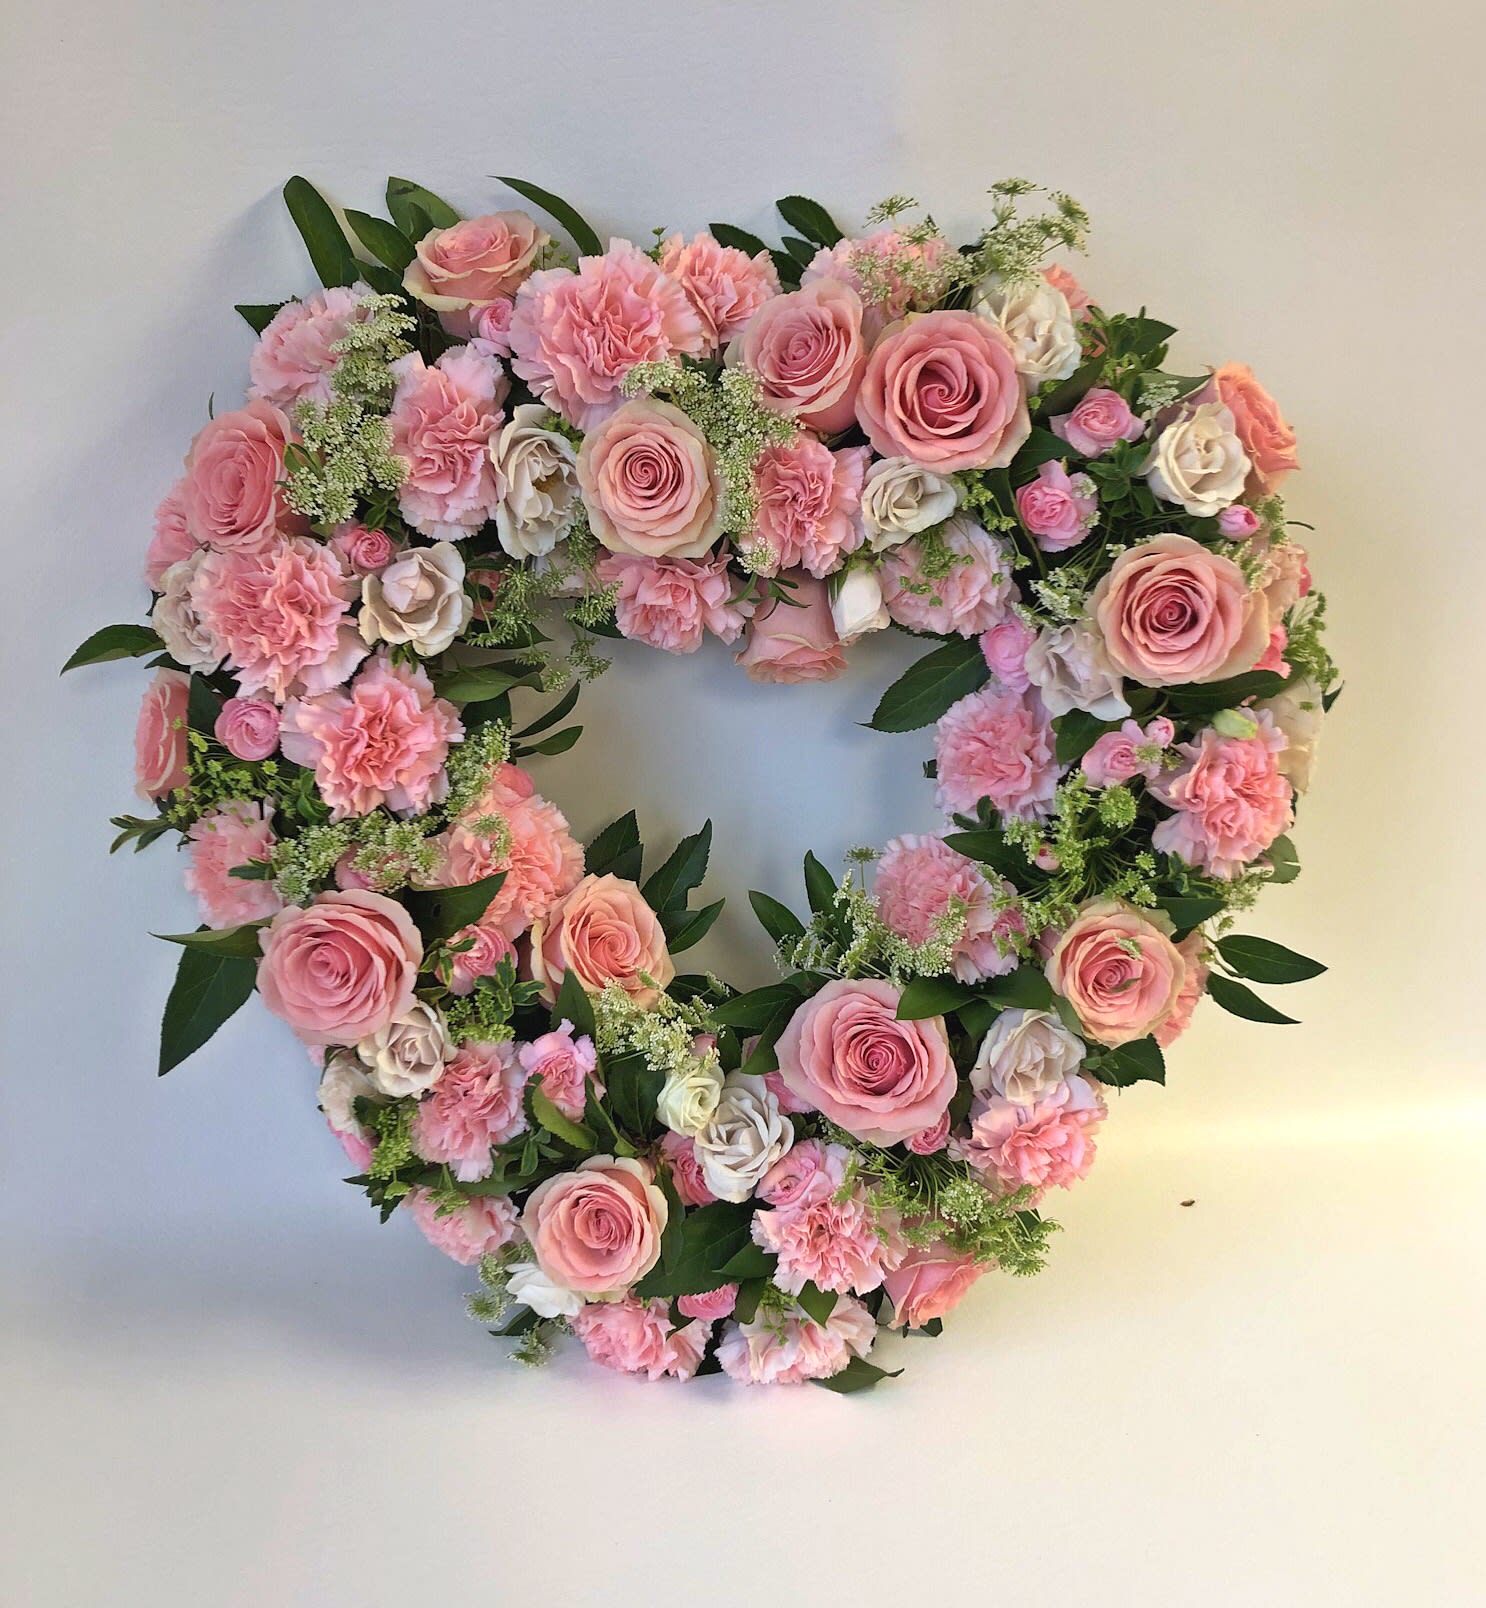 Spirited Heart Wreath with Roses, Lilies & Orchids by Jacob Maarse Florists